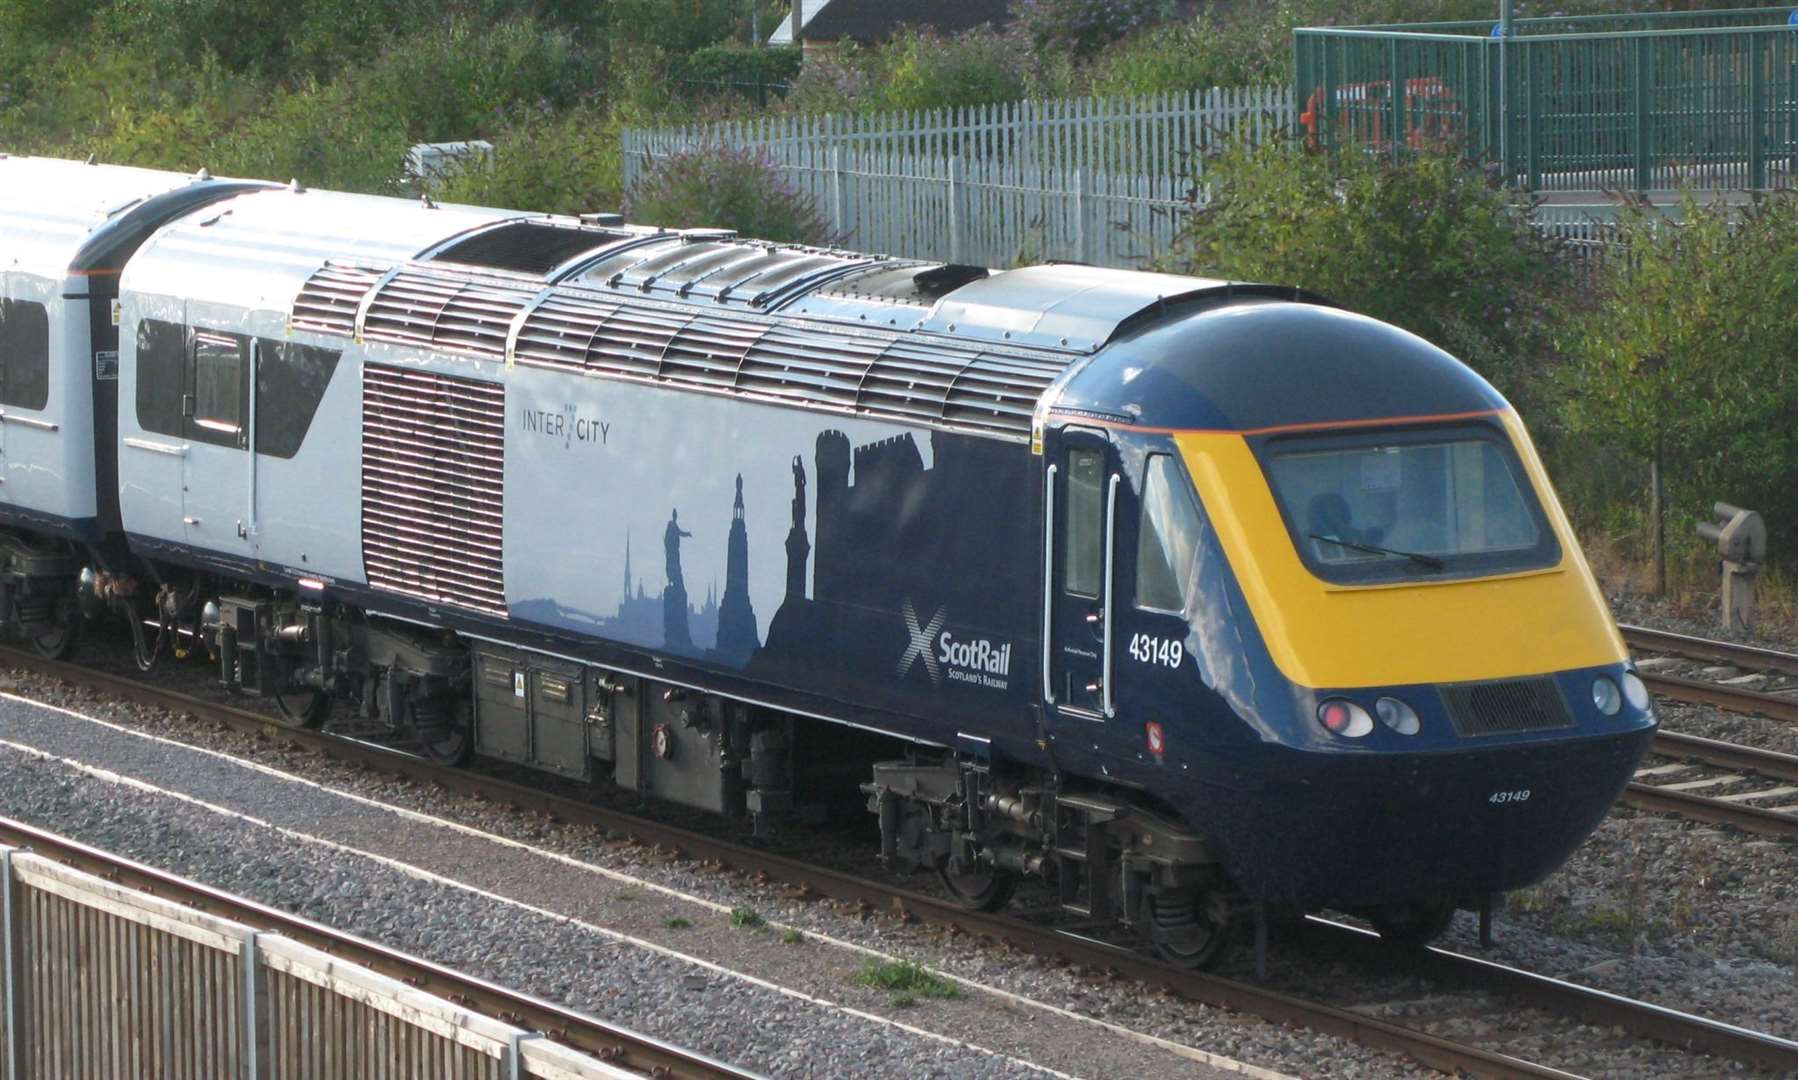 ScotRail services north of Inverness were affected on Tuesday evening.